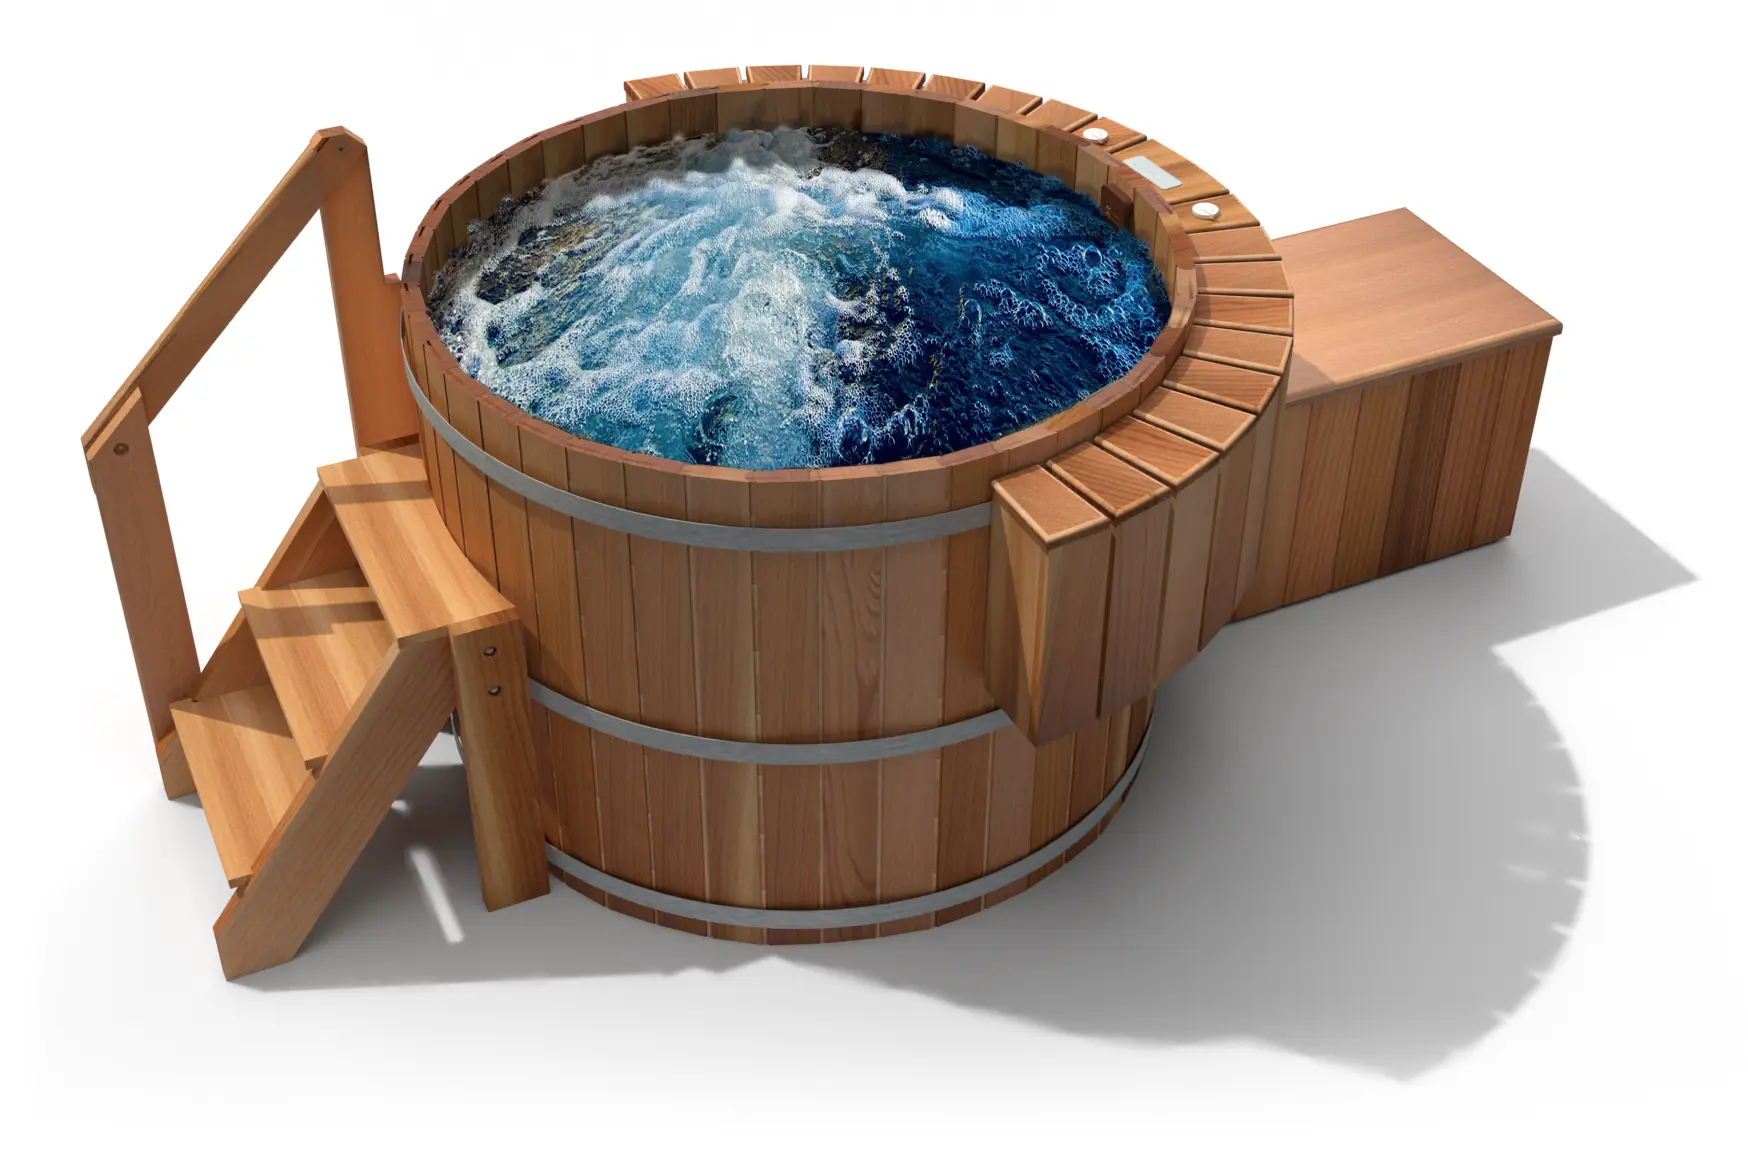 Classic Deluxe Cedar Wood Hot Tub - jets on